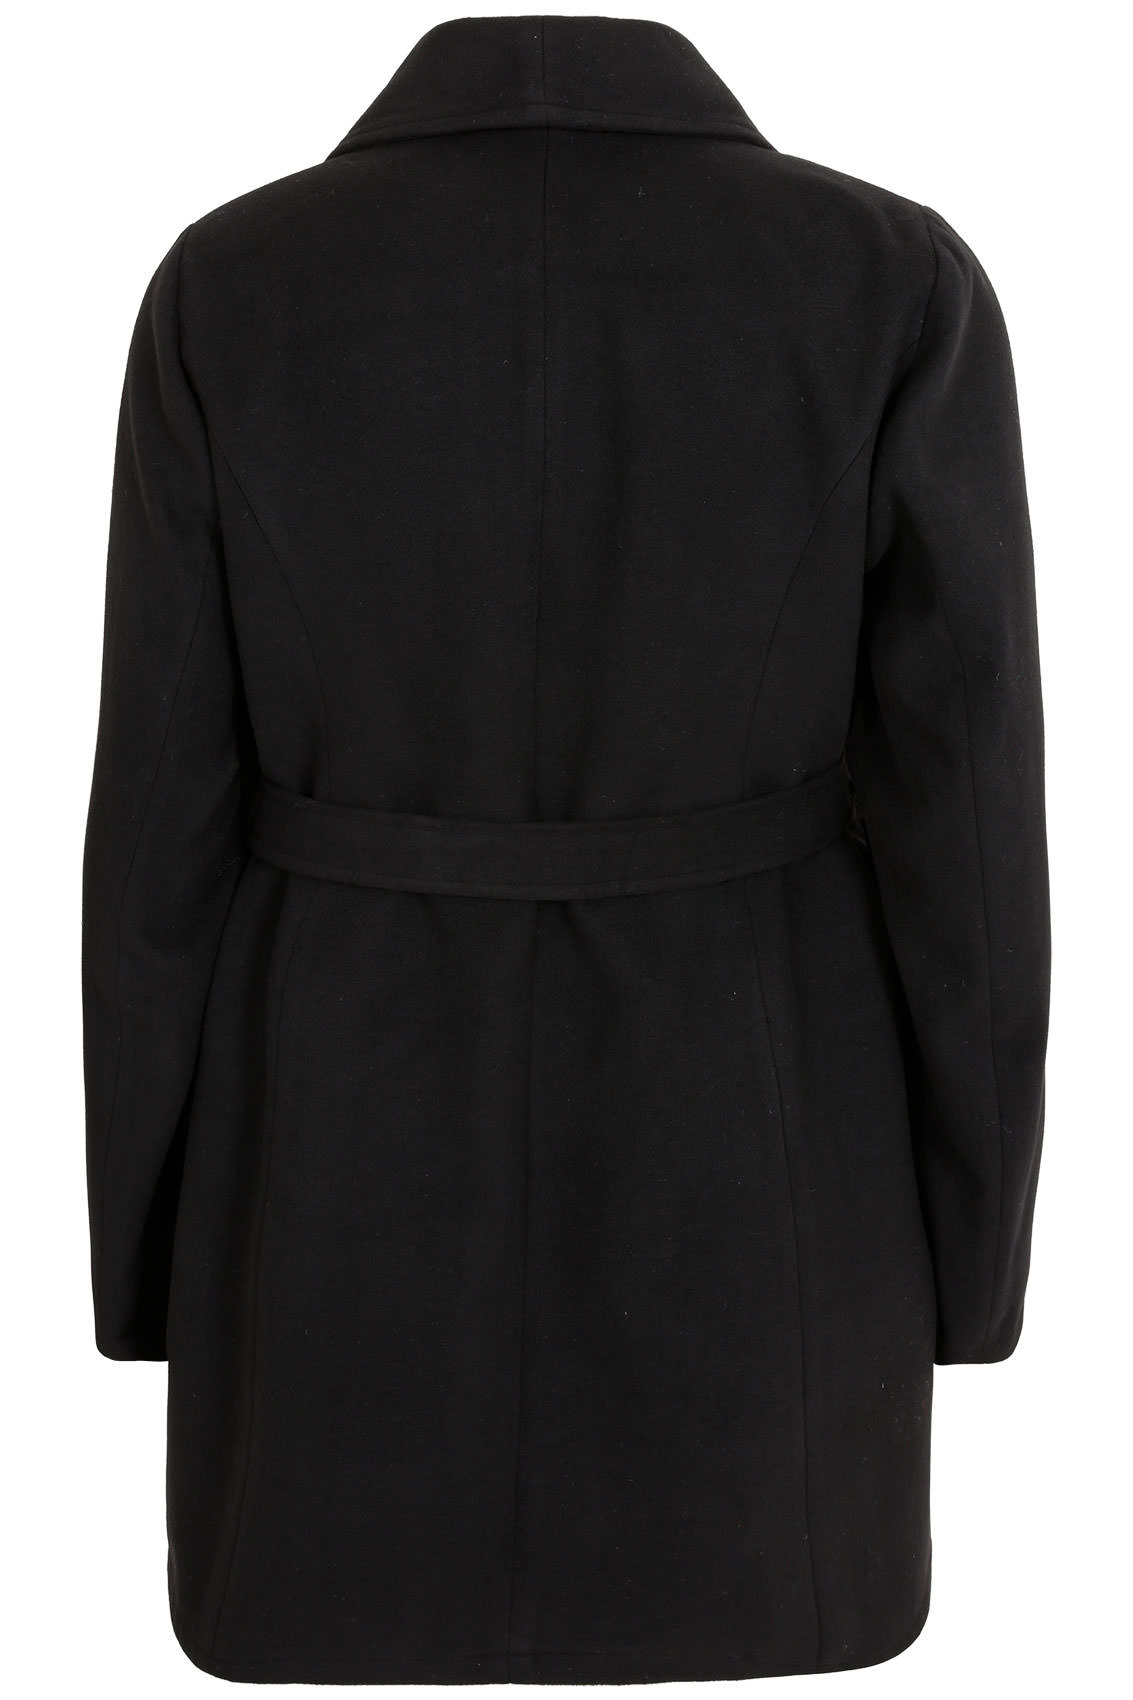 Black Panelled Belted Coat, Plus size 16 to 32